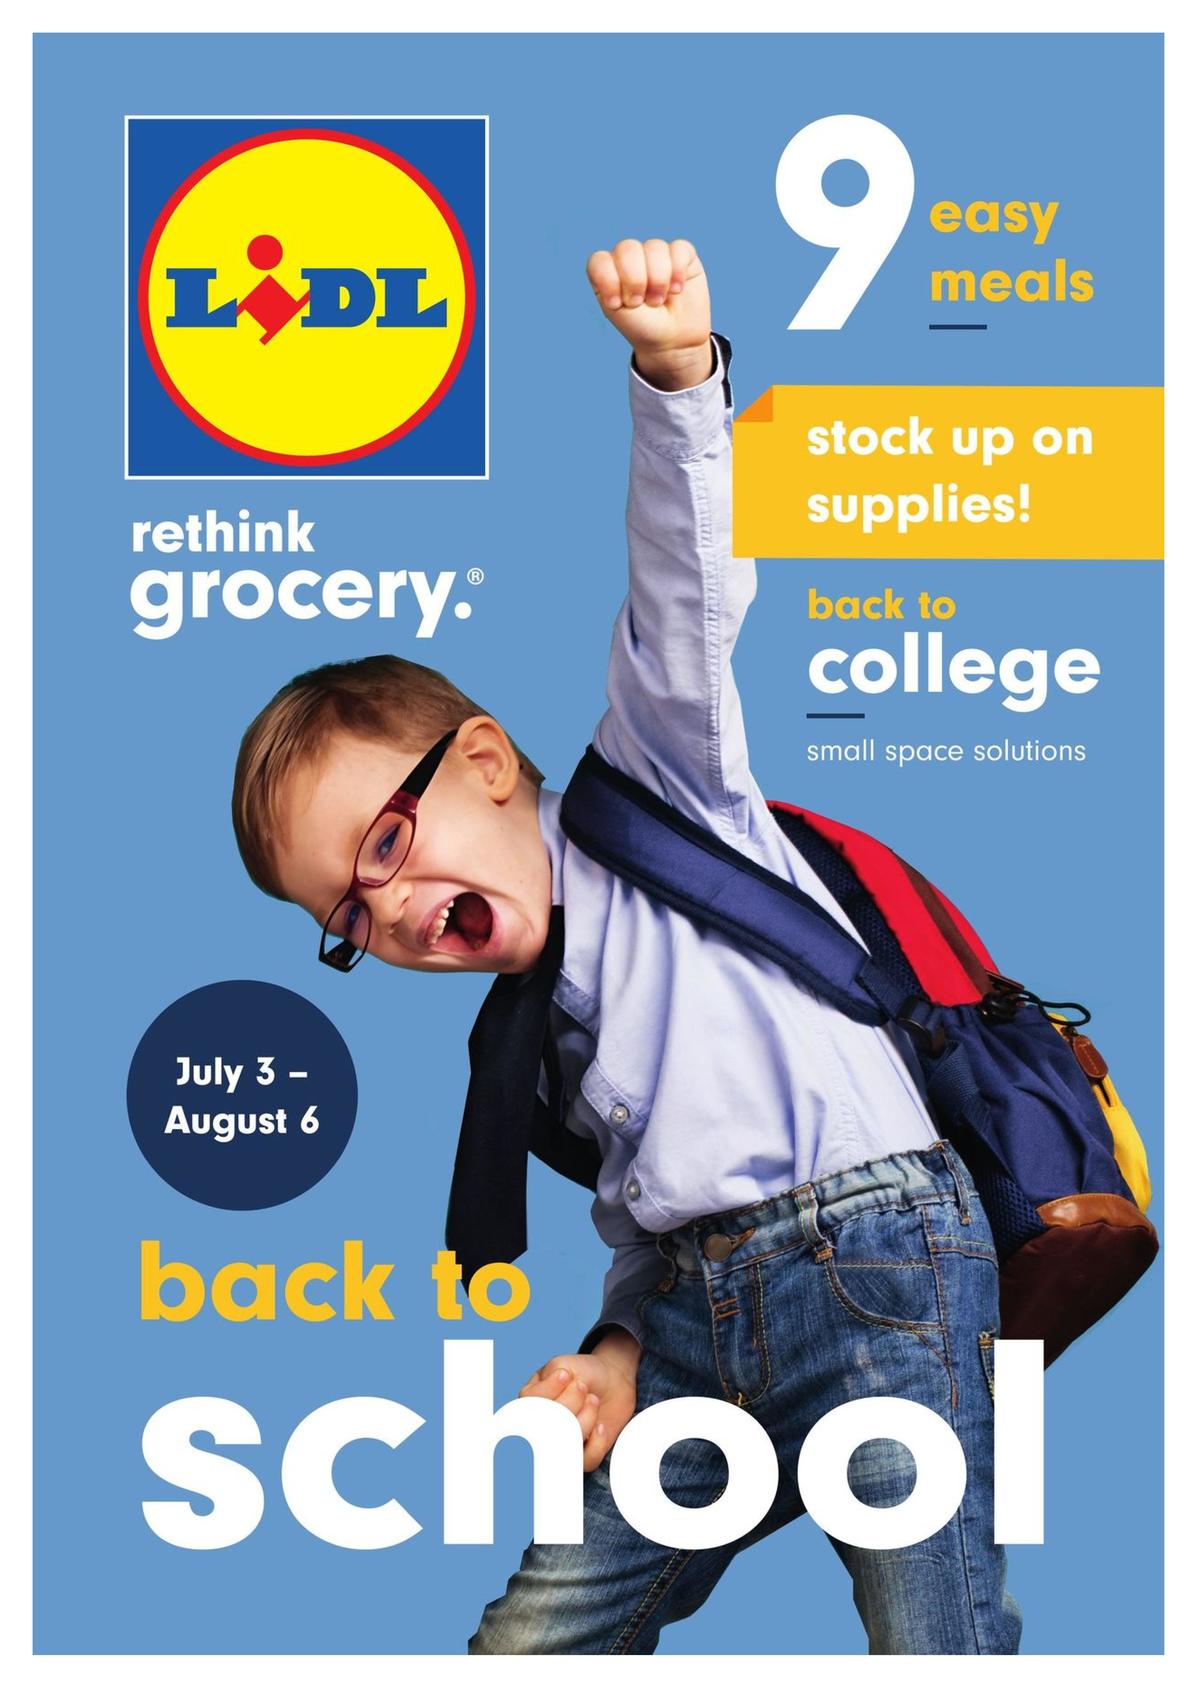 LIDL Magazine Weekly Ad from July 3